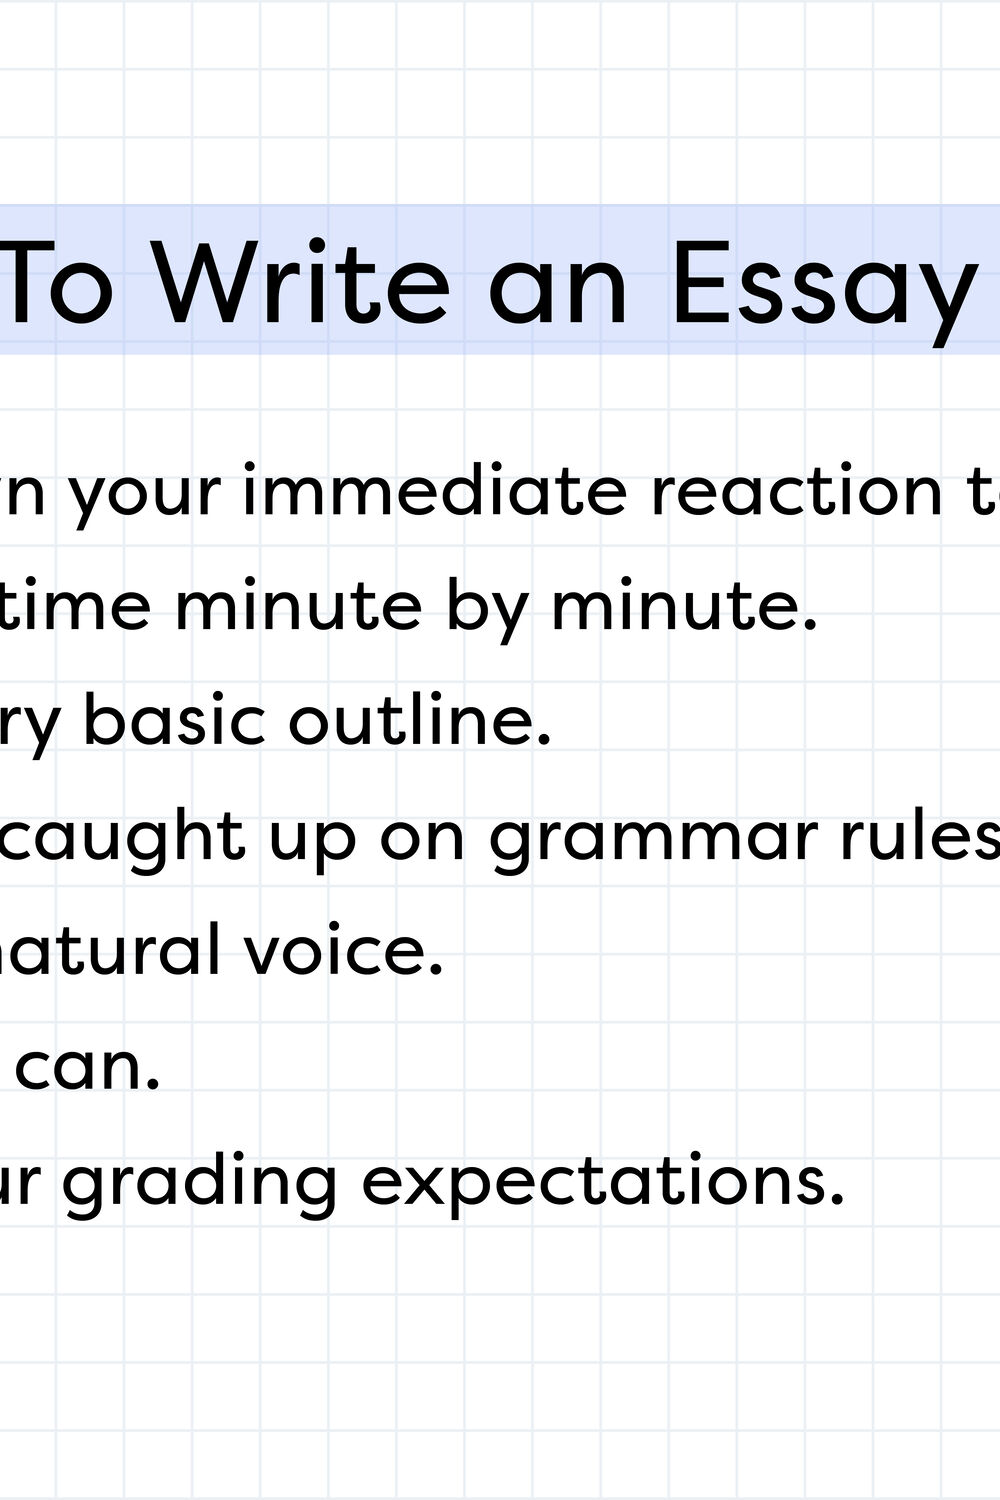 how to get an essay done fast